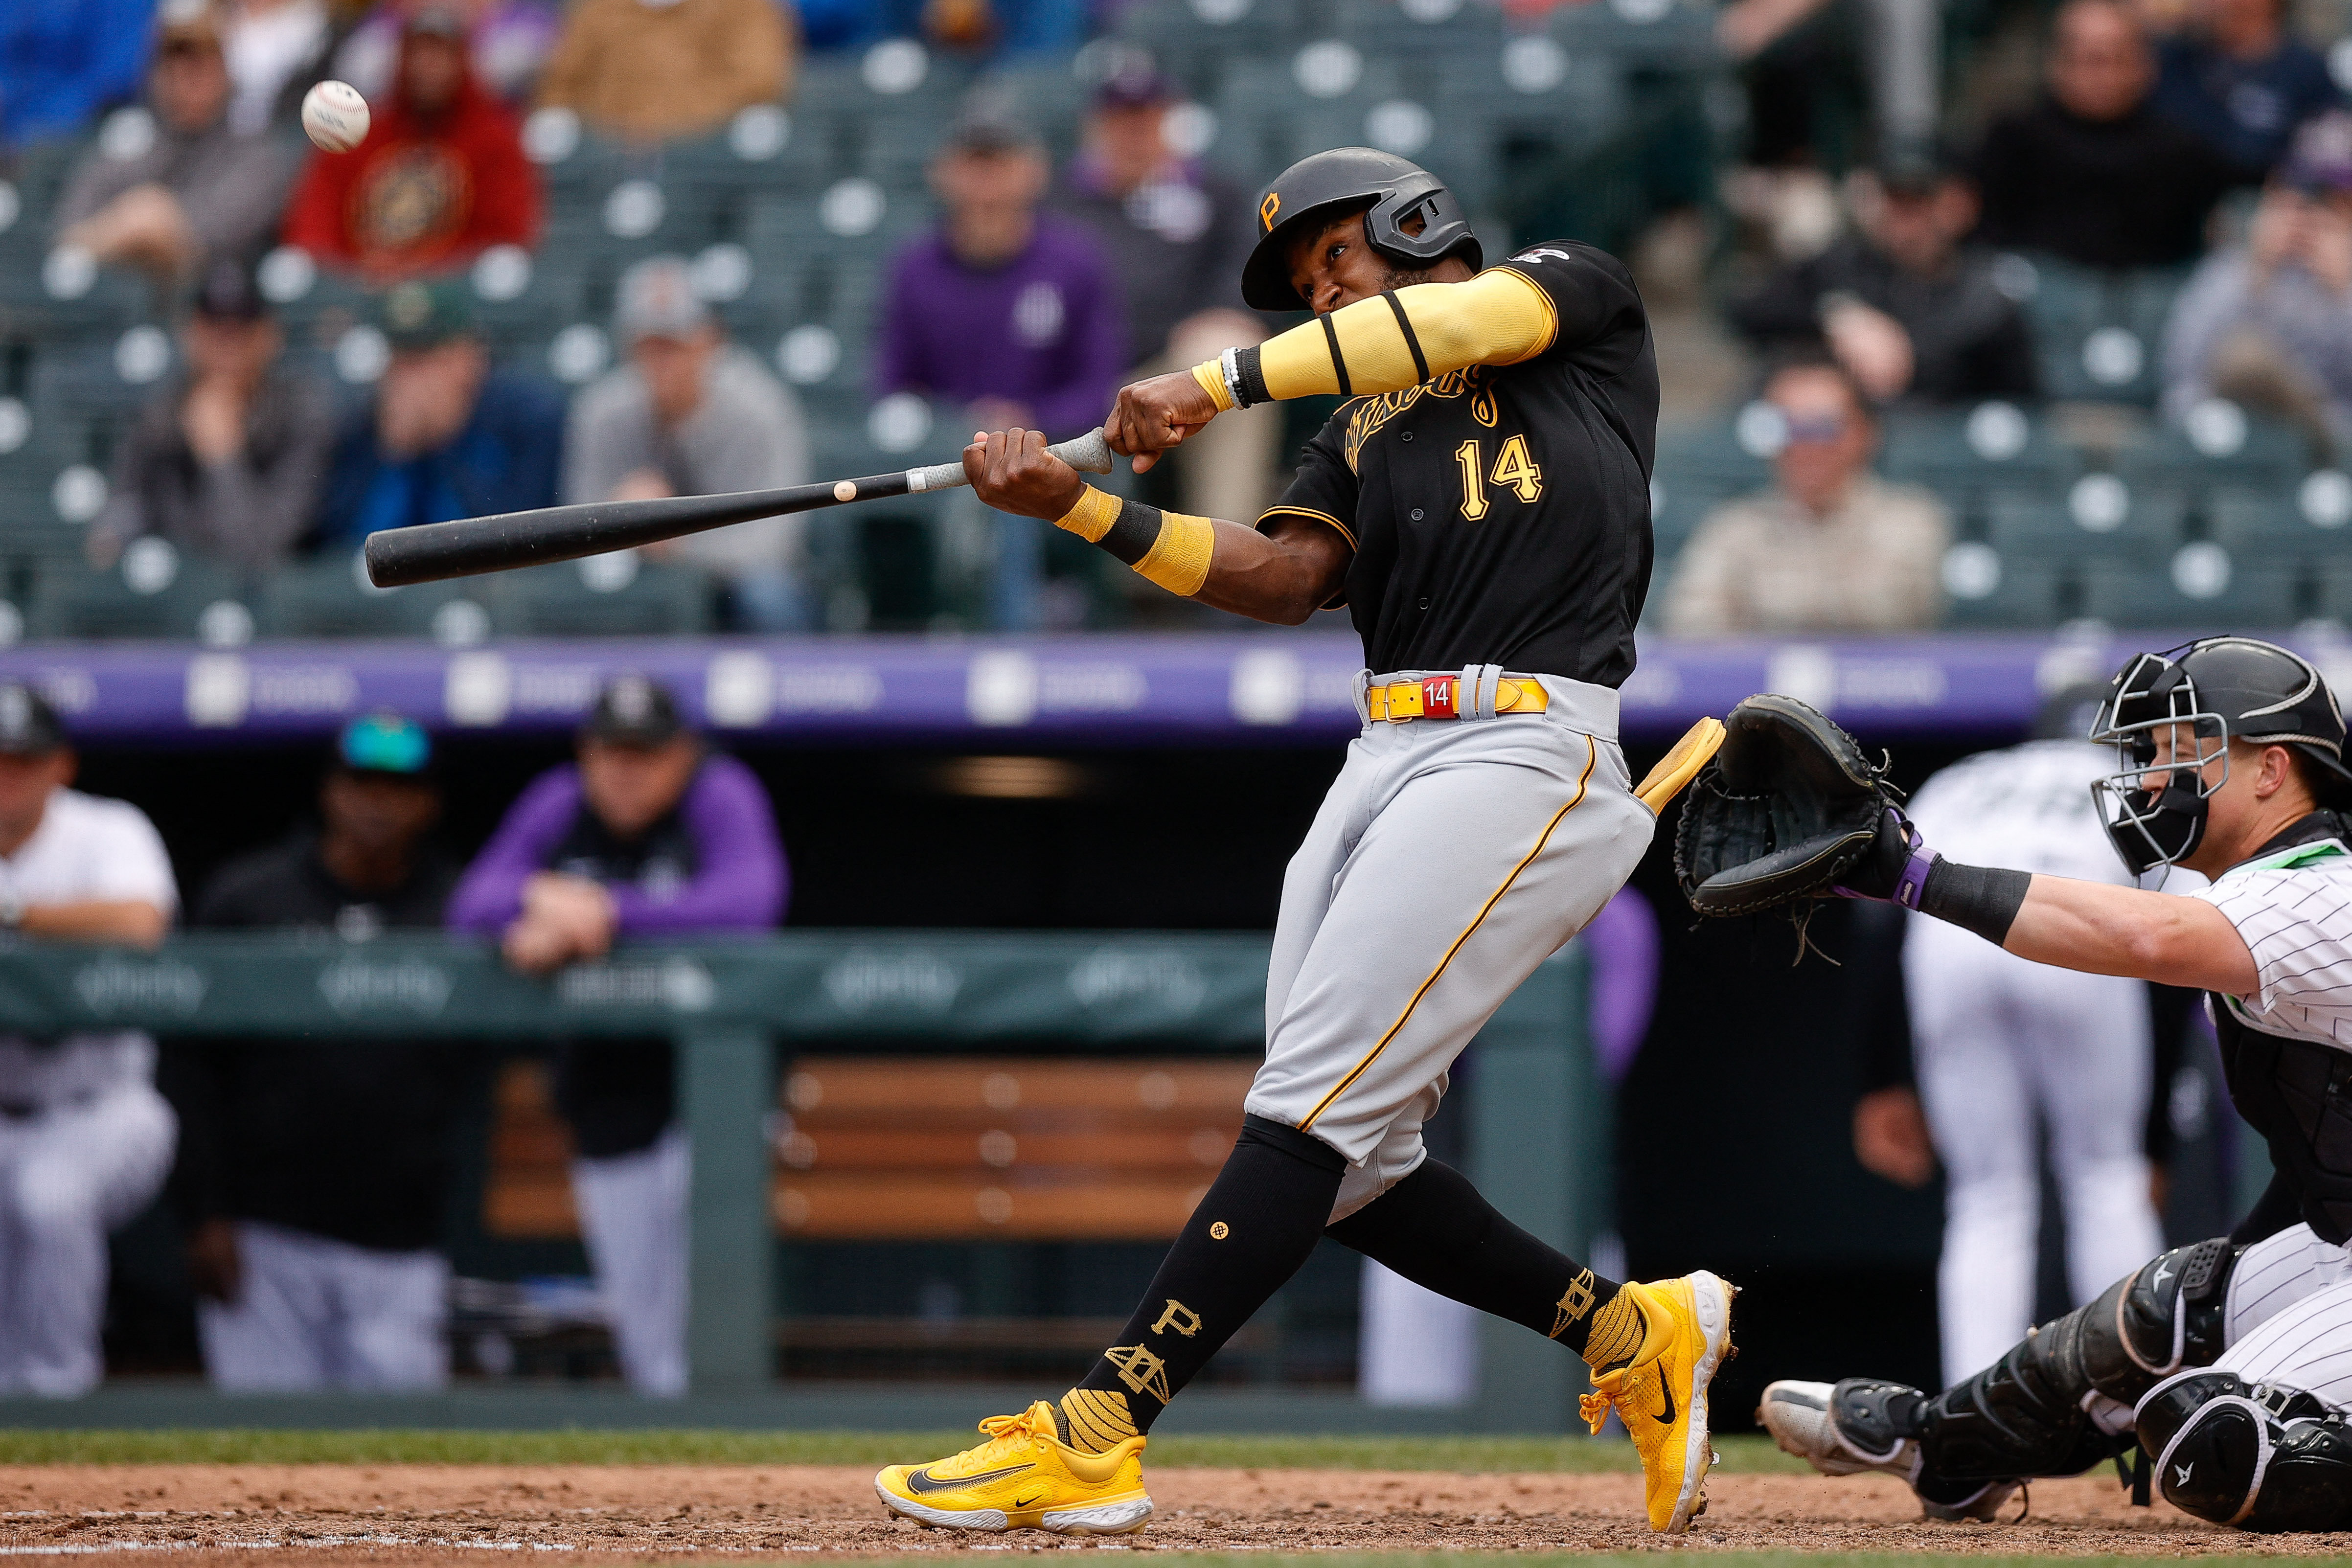 Pirates sweep Rockies at Coors Field